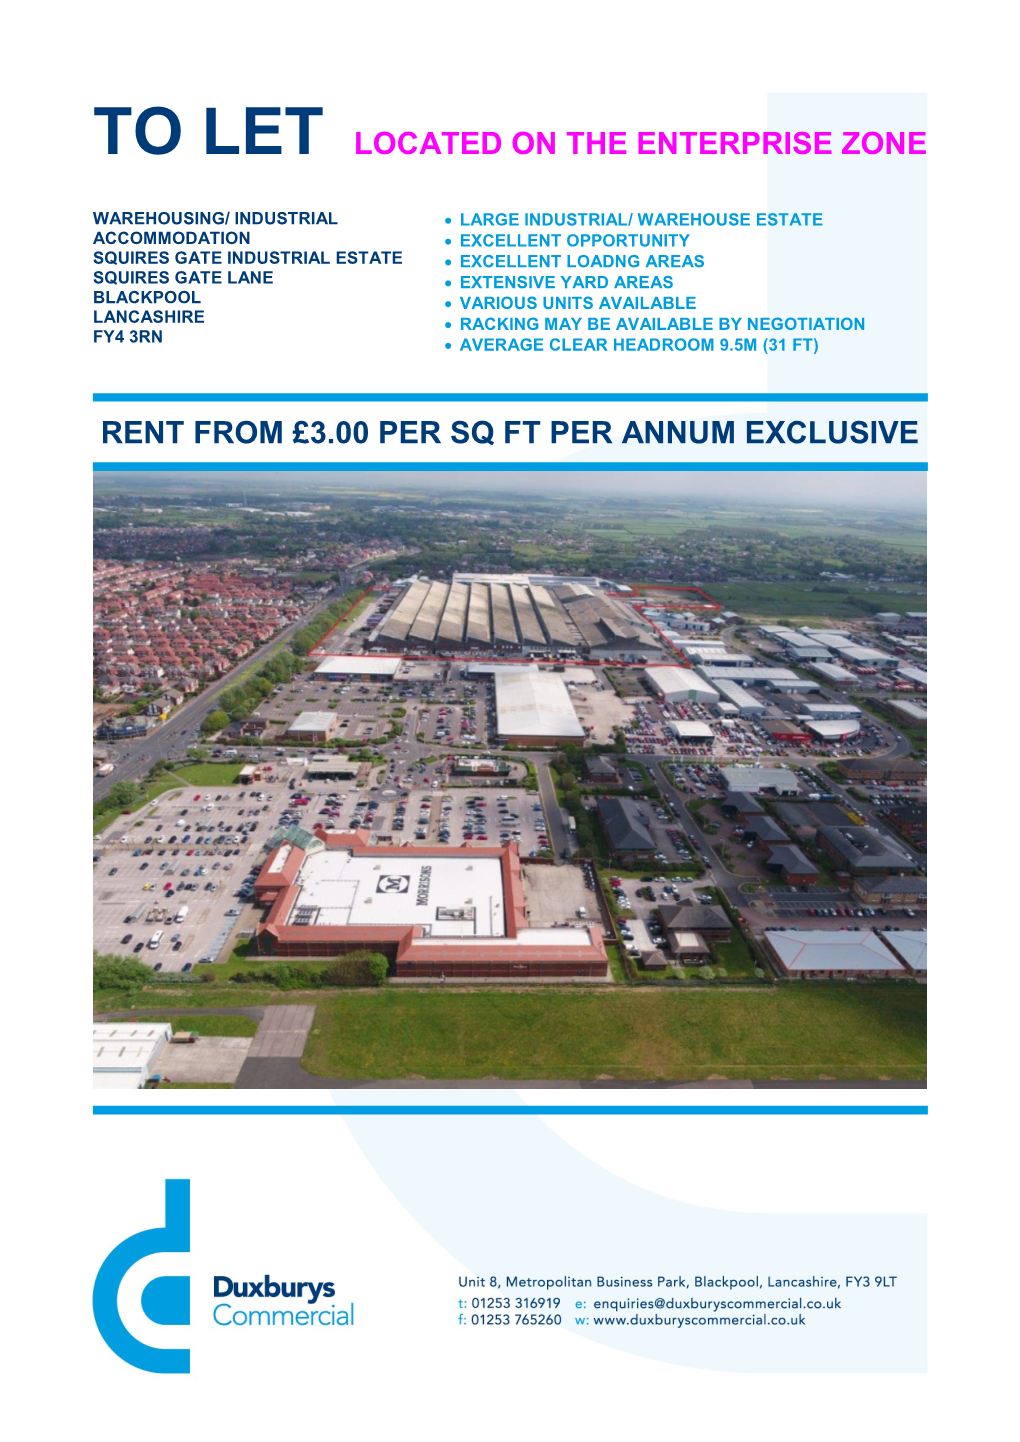 To Let Located on the Enterprise Zone